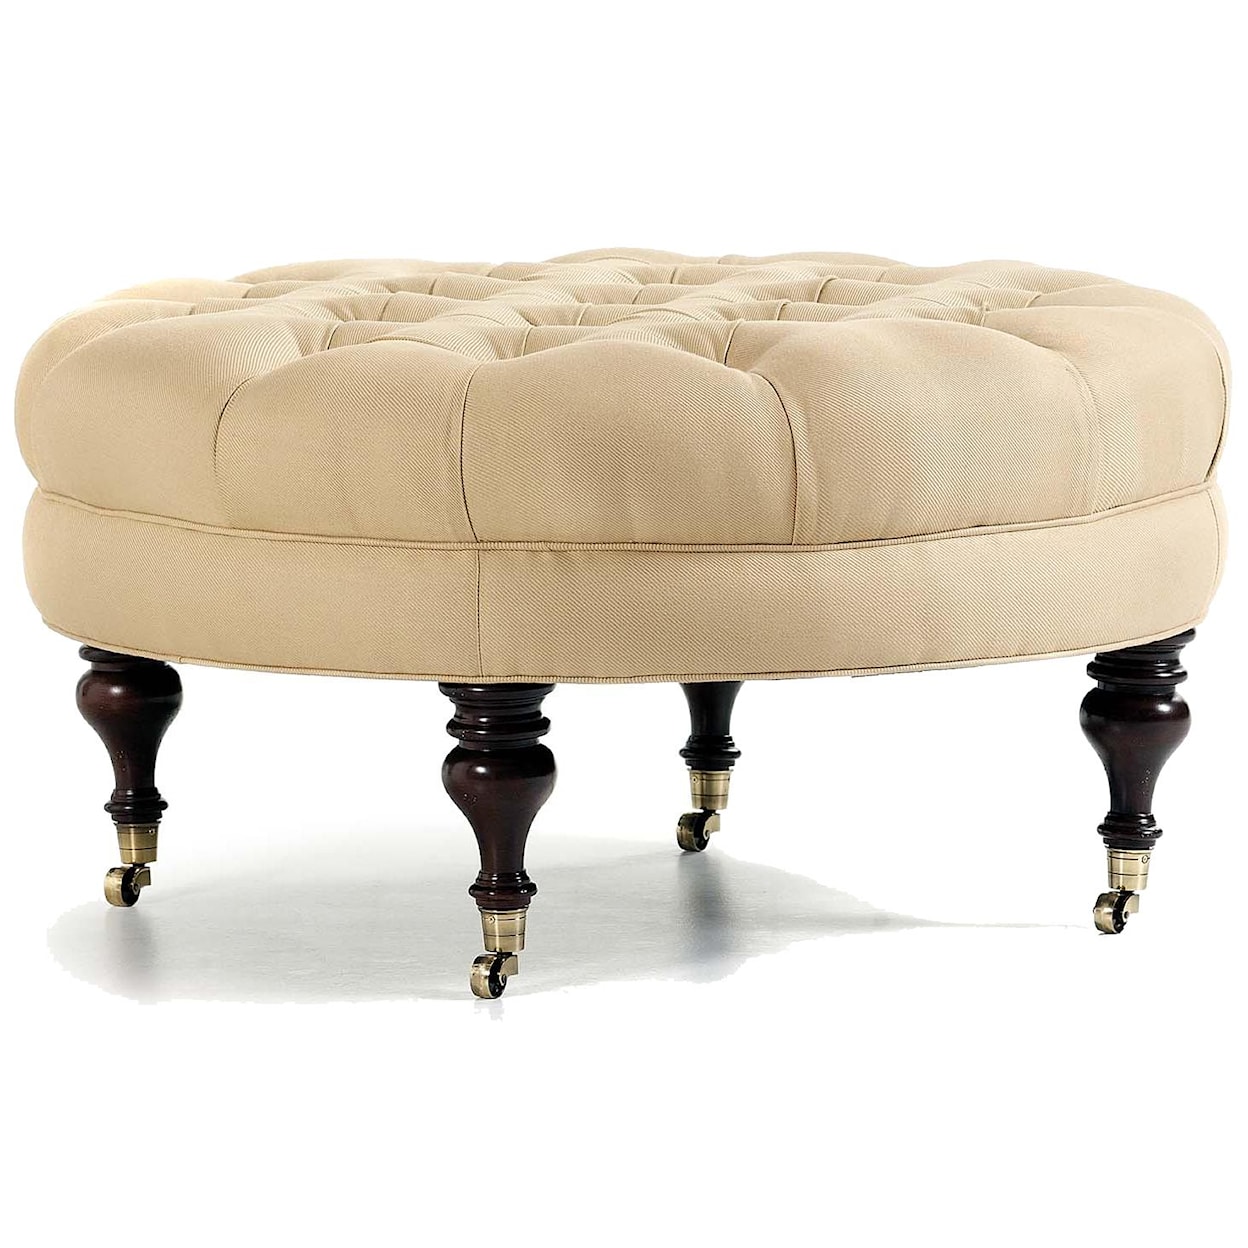 Jessica Charles Fine Upholstered Accents Dinah Ottoman   